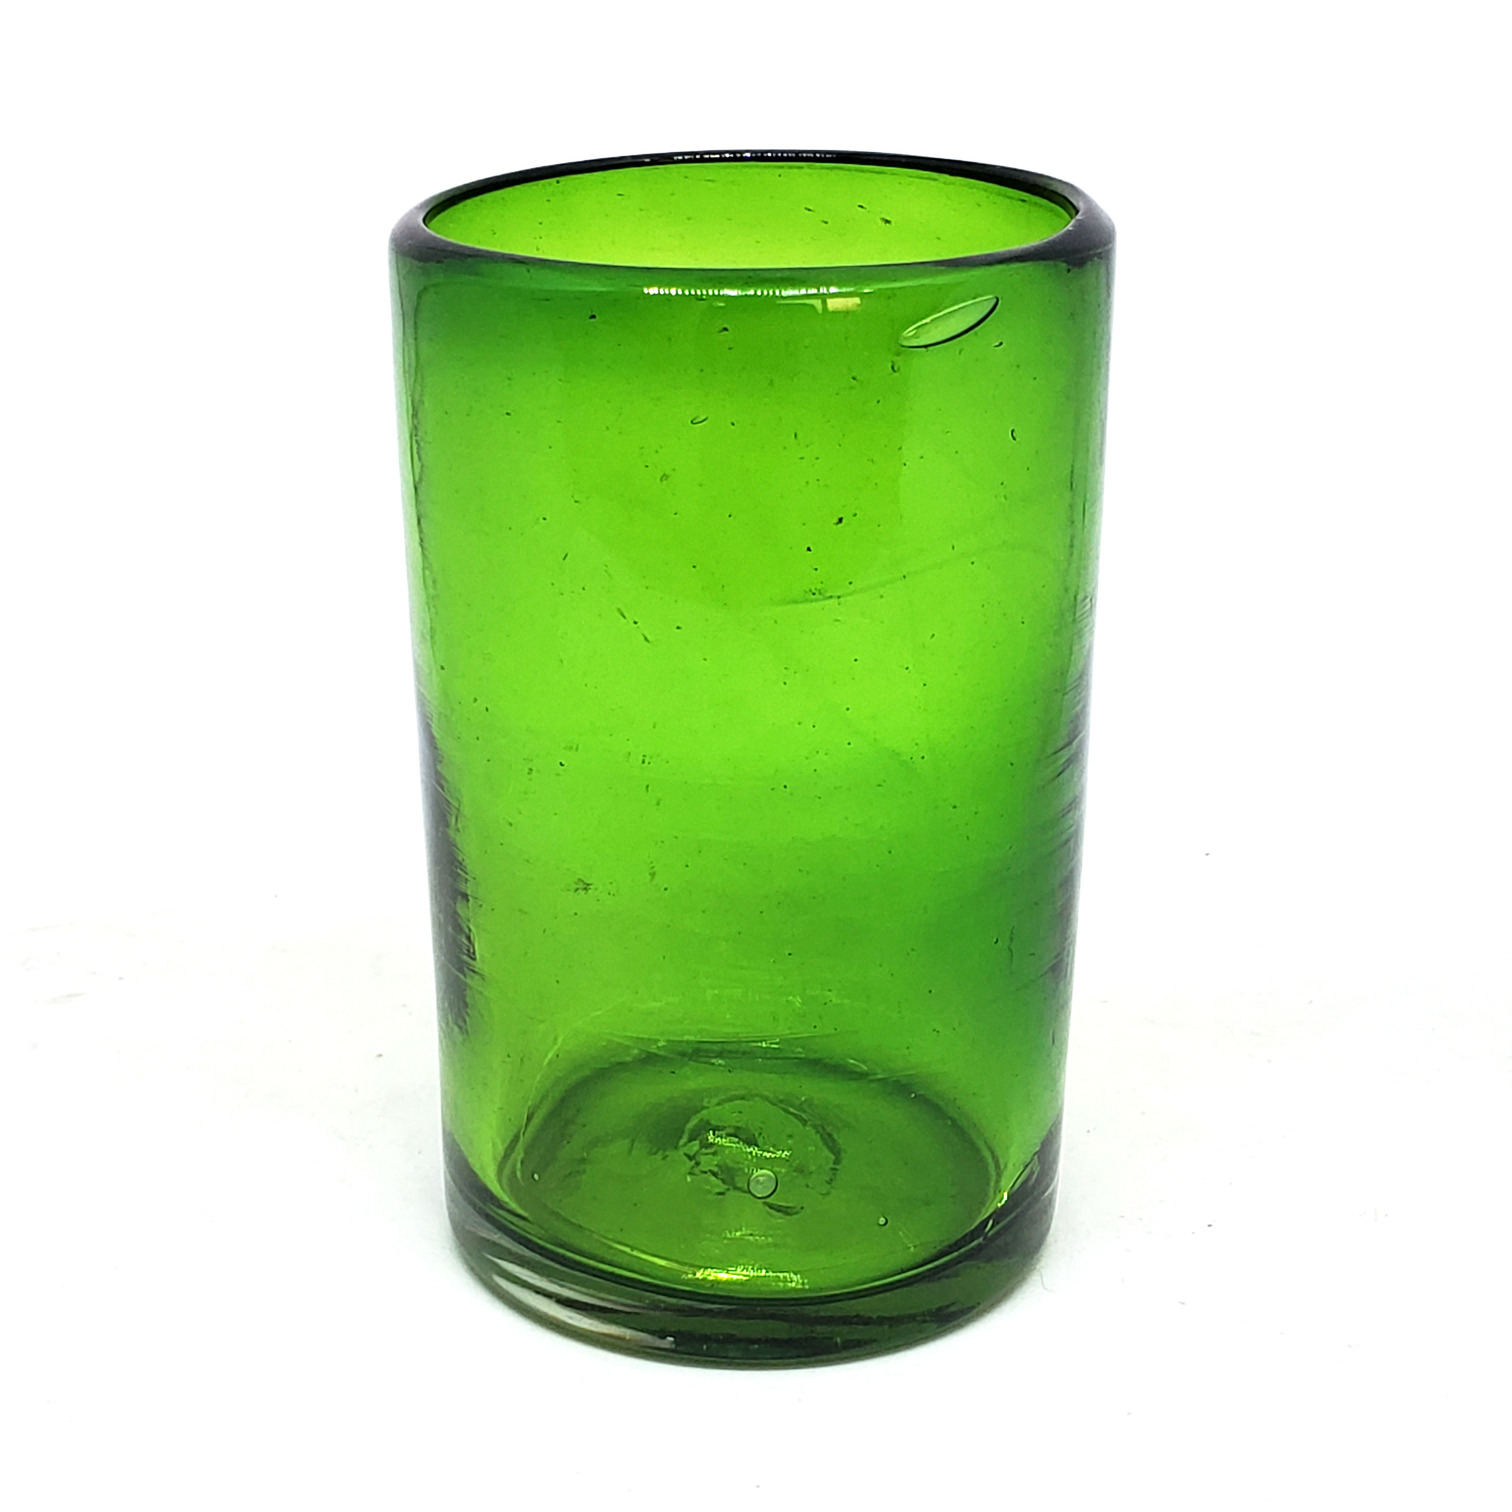 Sale Items / Solid Emerald Green 14 oz Drinking Glasses  / These handcrafted glasses deliver a classic touch to your favorite drink.